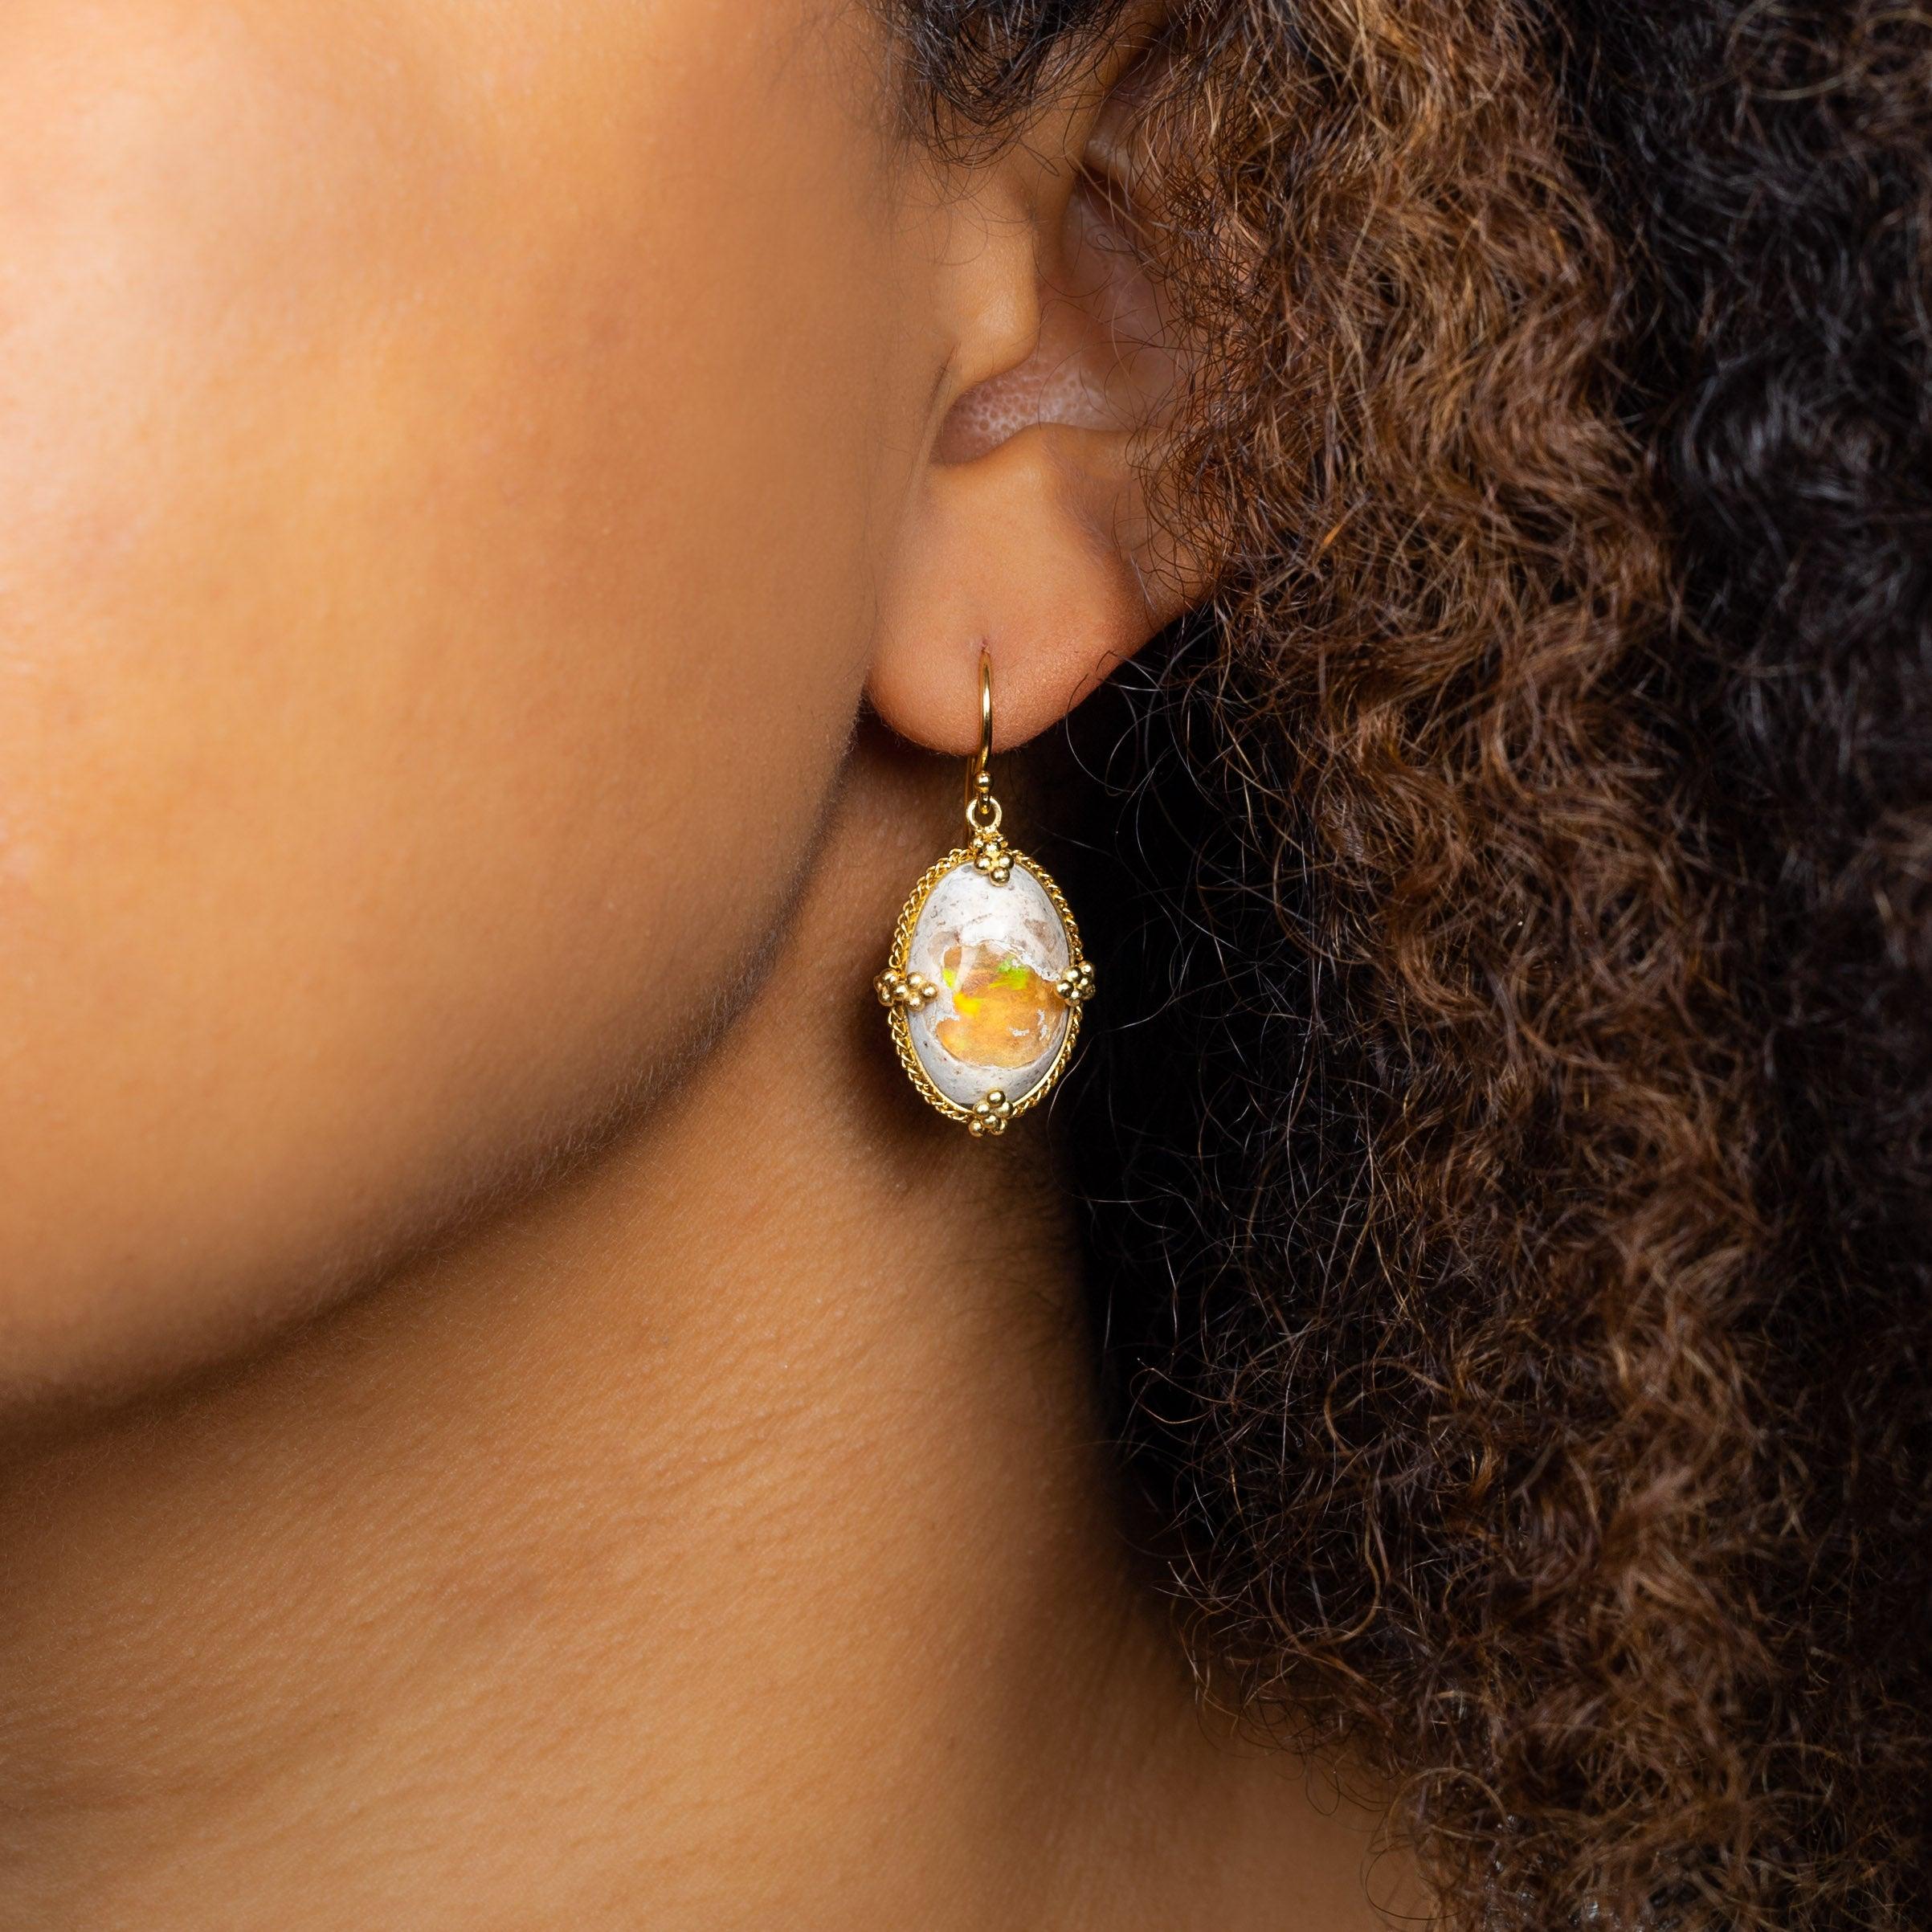 With a milky exterior giving way to a vibrant center that shimmers with the banked fire of a nearly infinite array of colors, the two Mexican Opals in these earrings feel like they could be the long-lost treasure from a dragon’s hoard. Set in gold